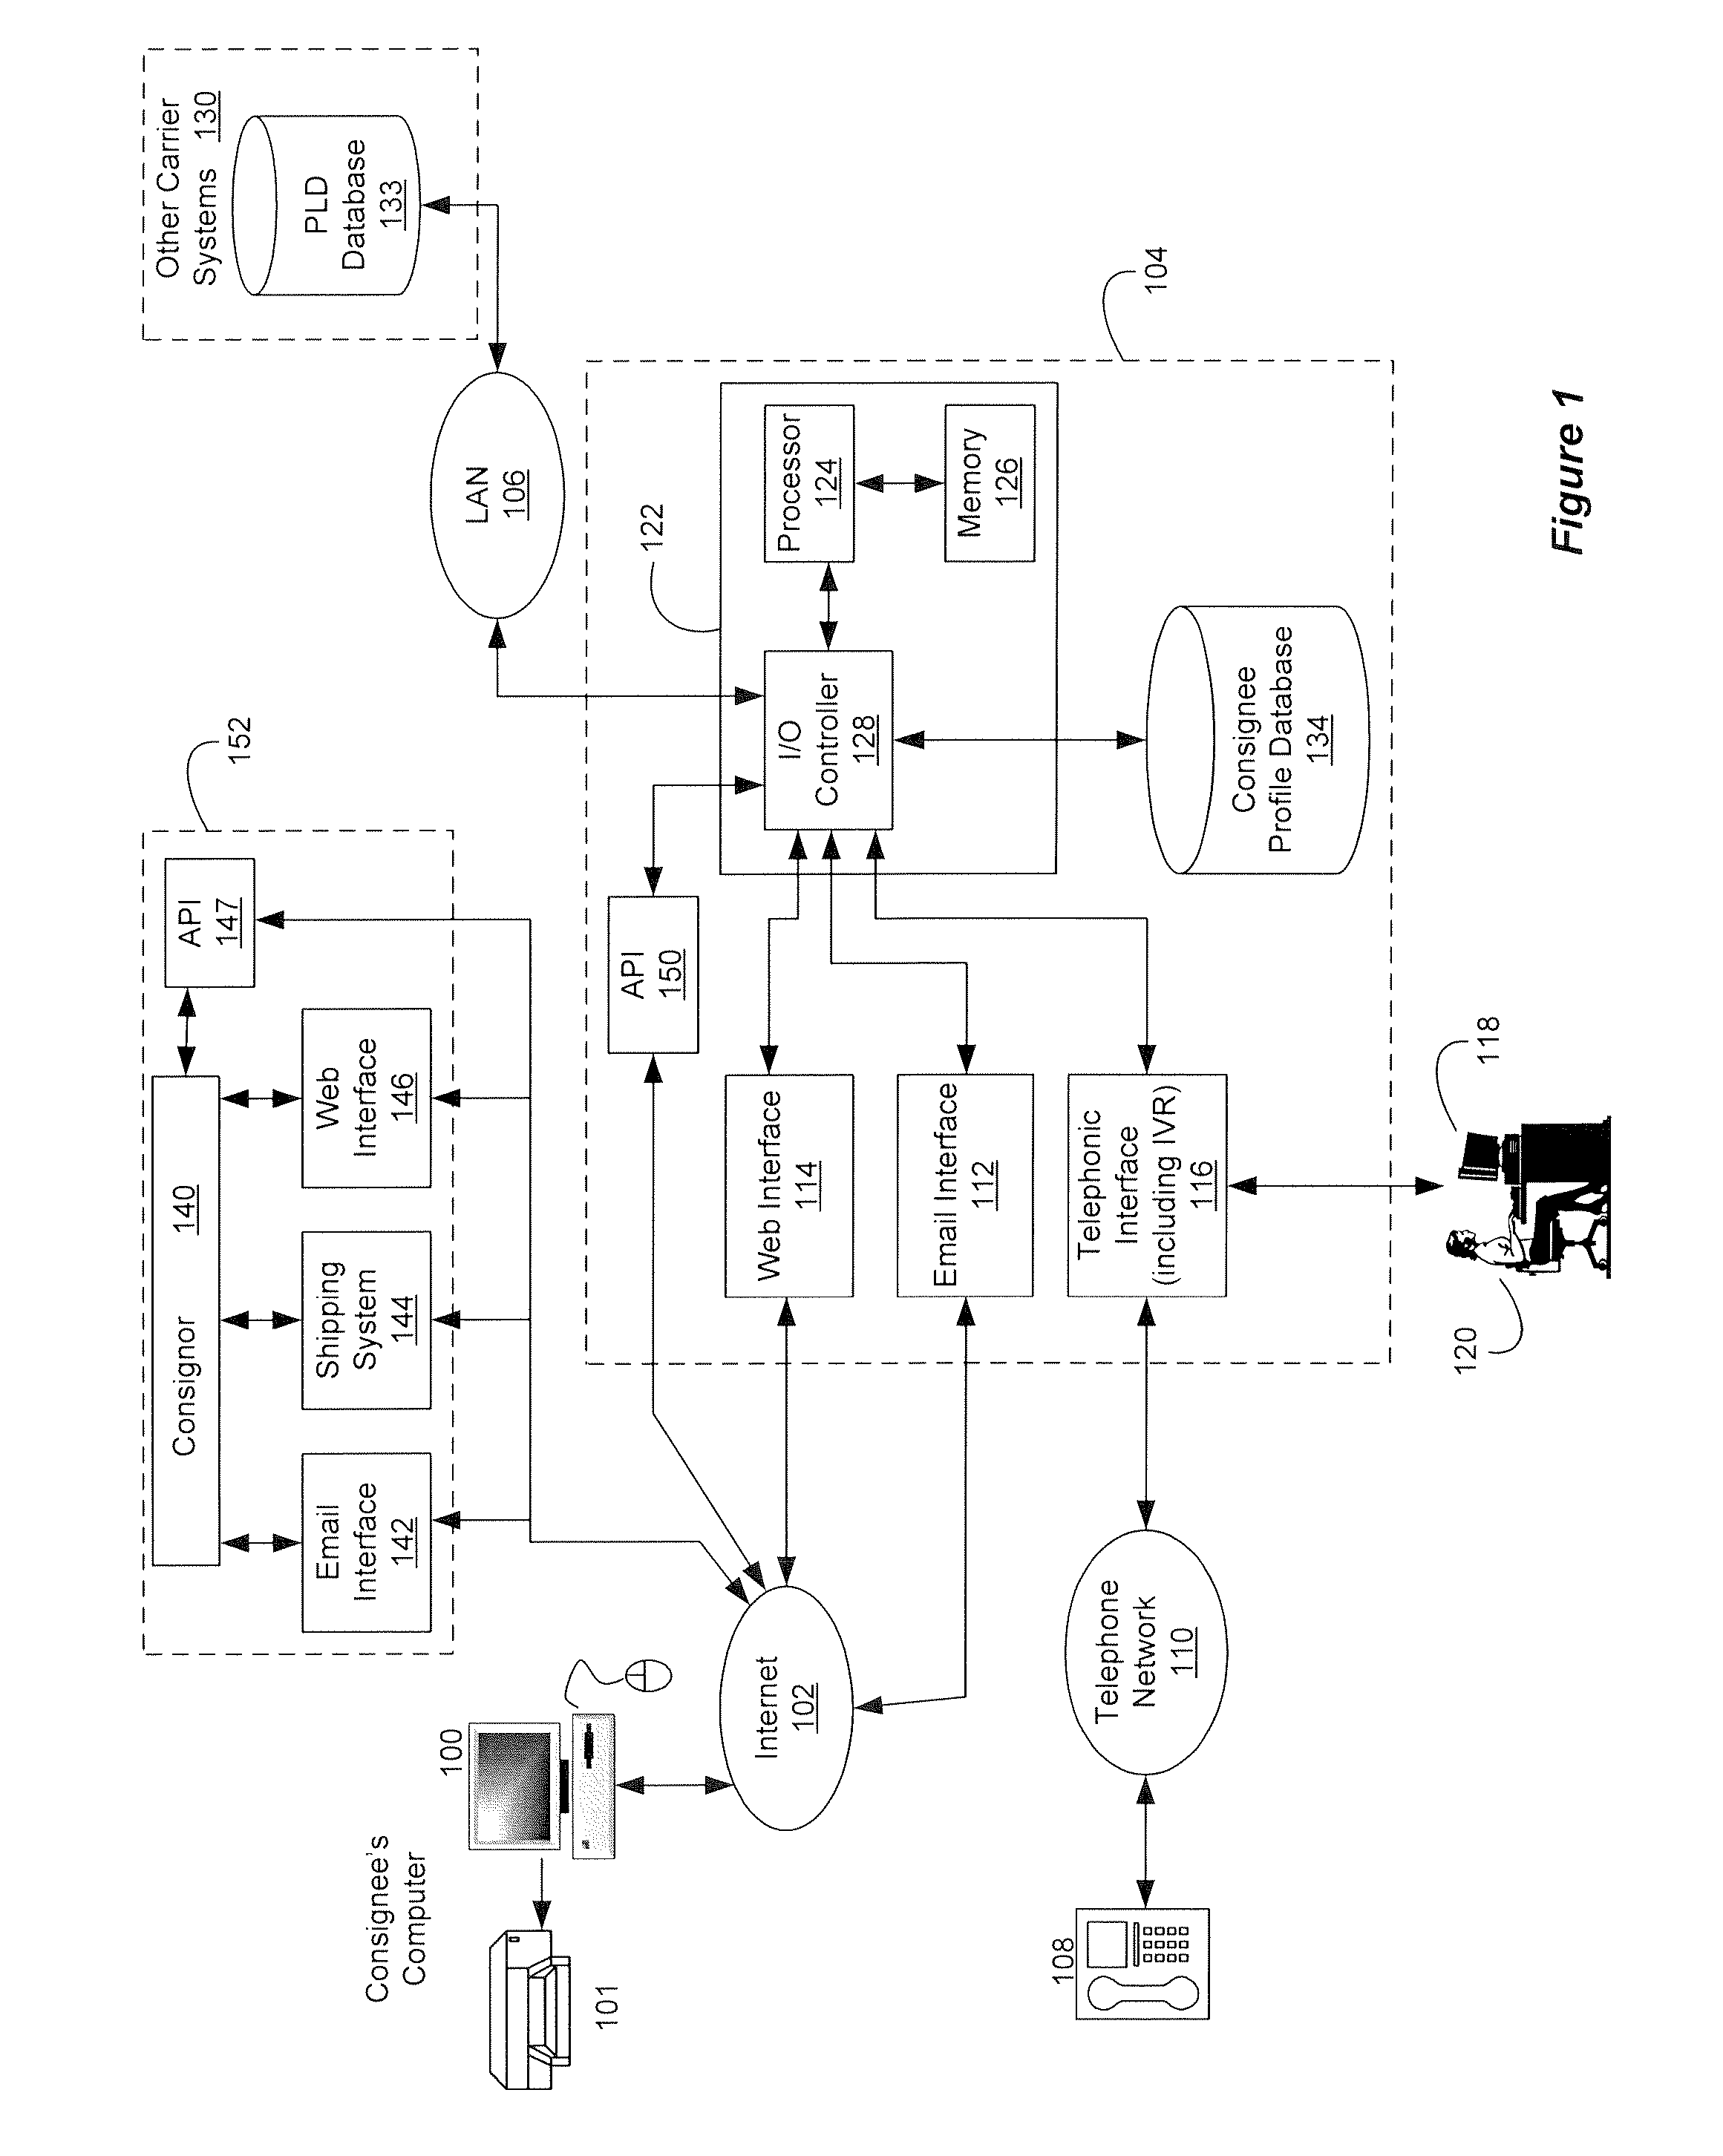 Systems and Methods for Providing Personalized Delivery Services